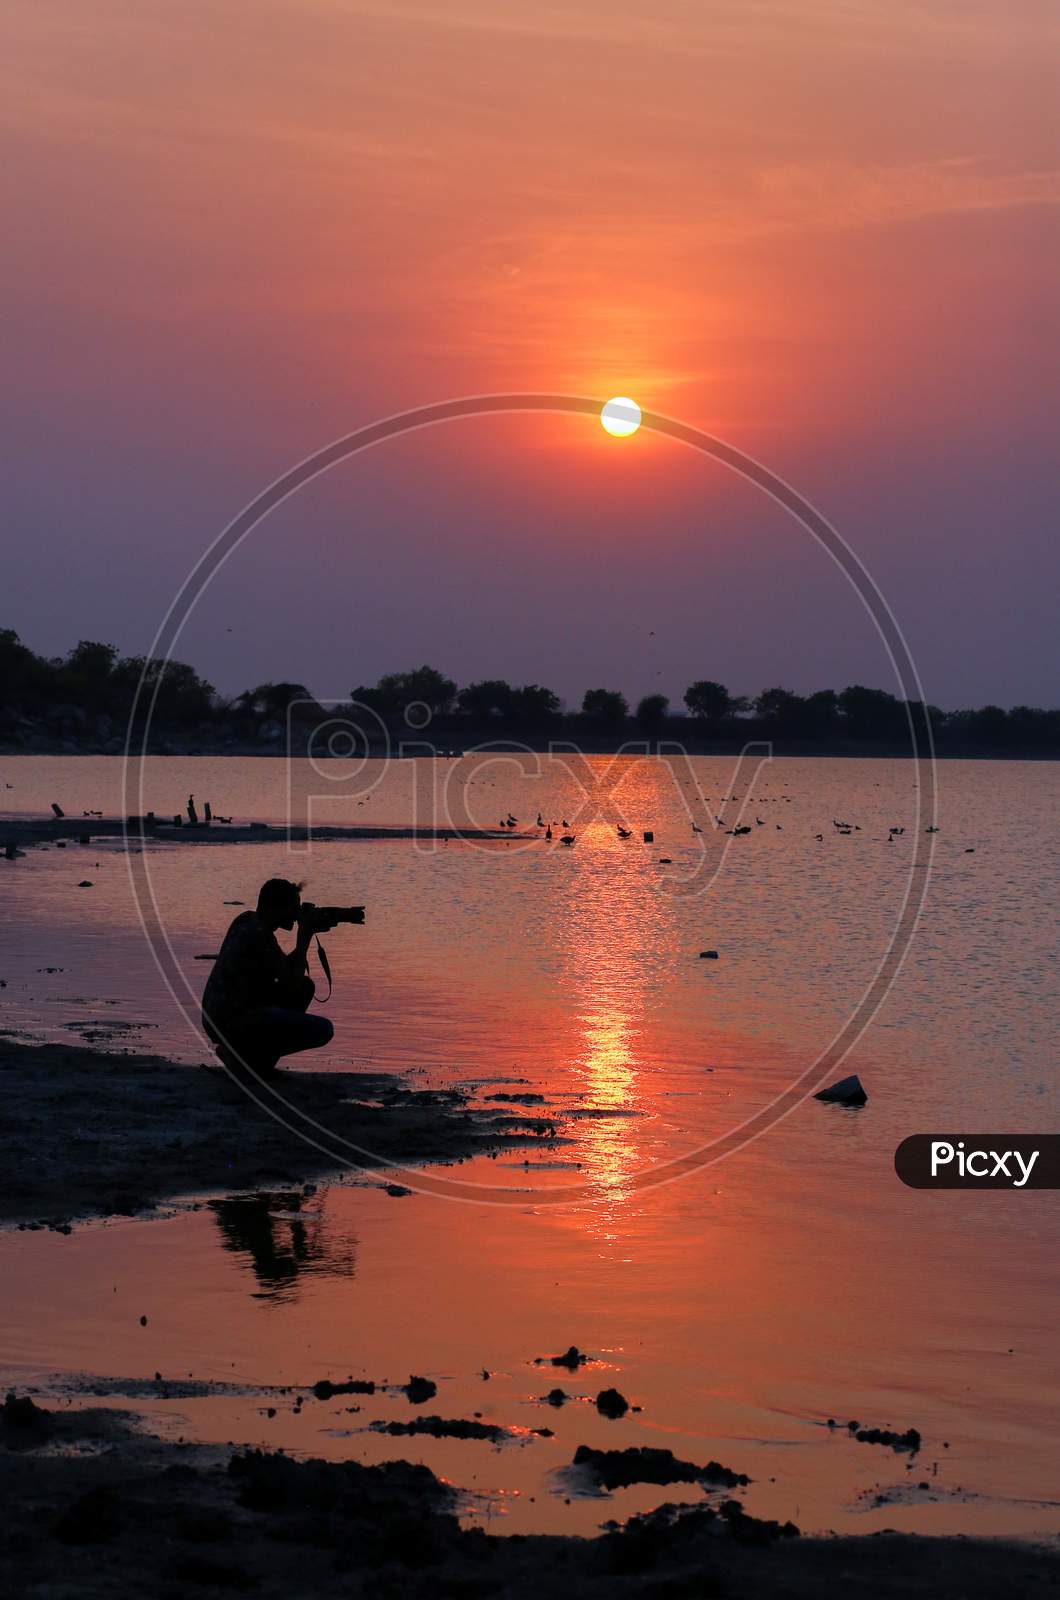 Silhouette of Indian Photographer shooting during sunset